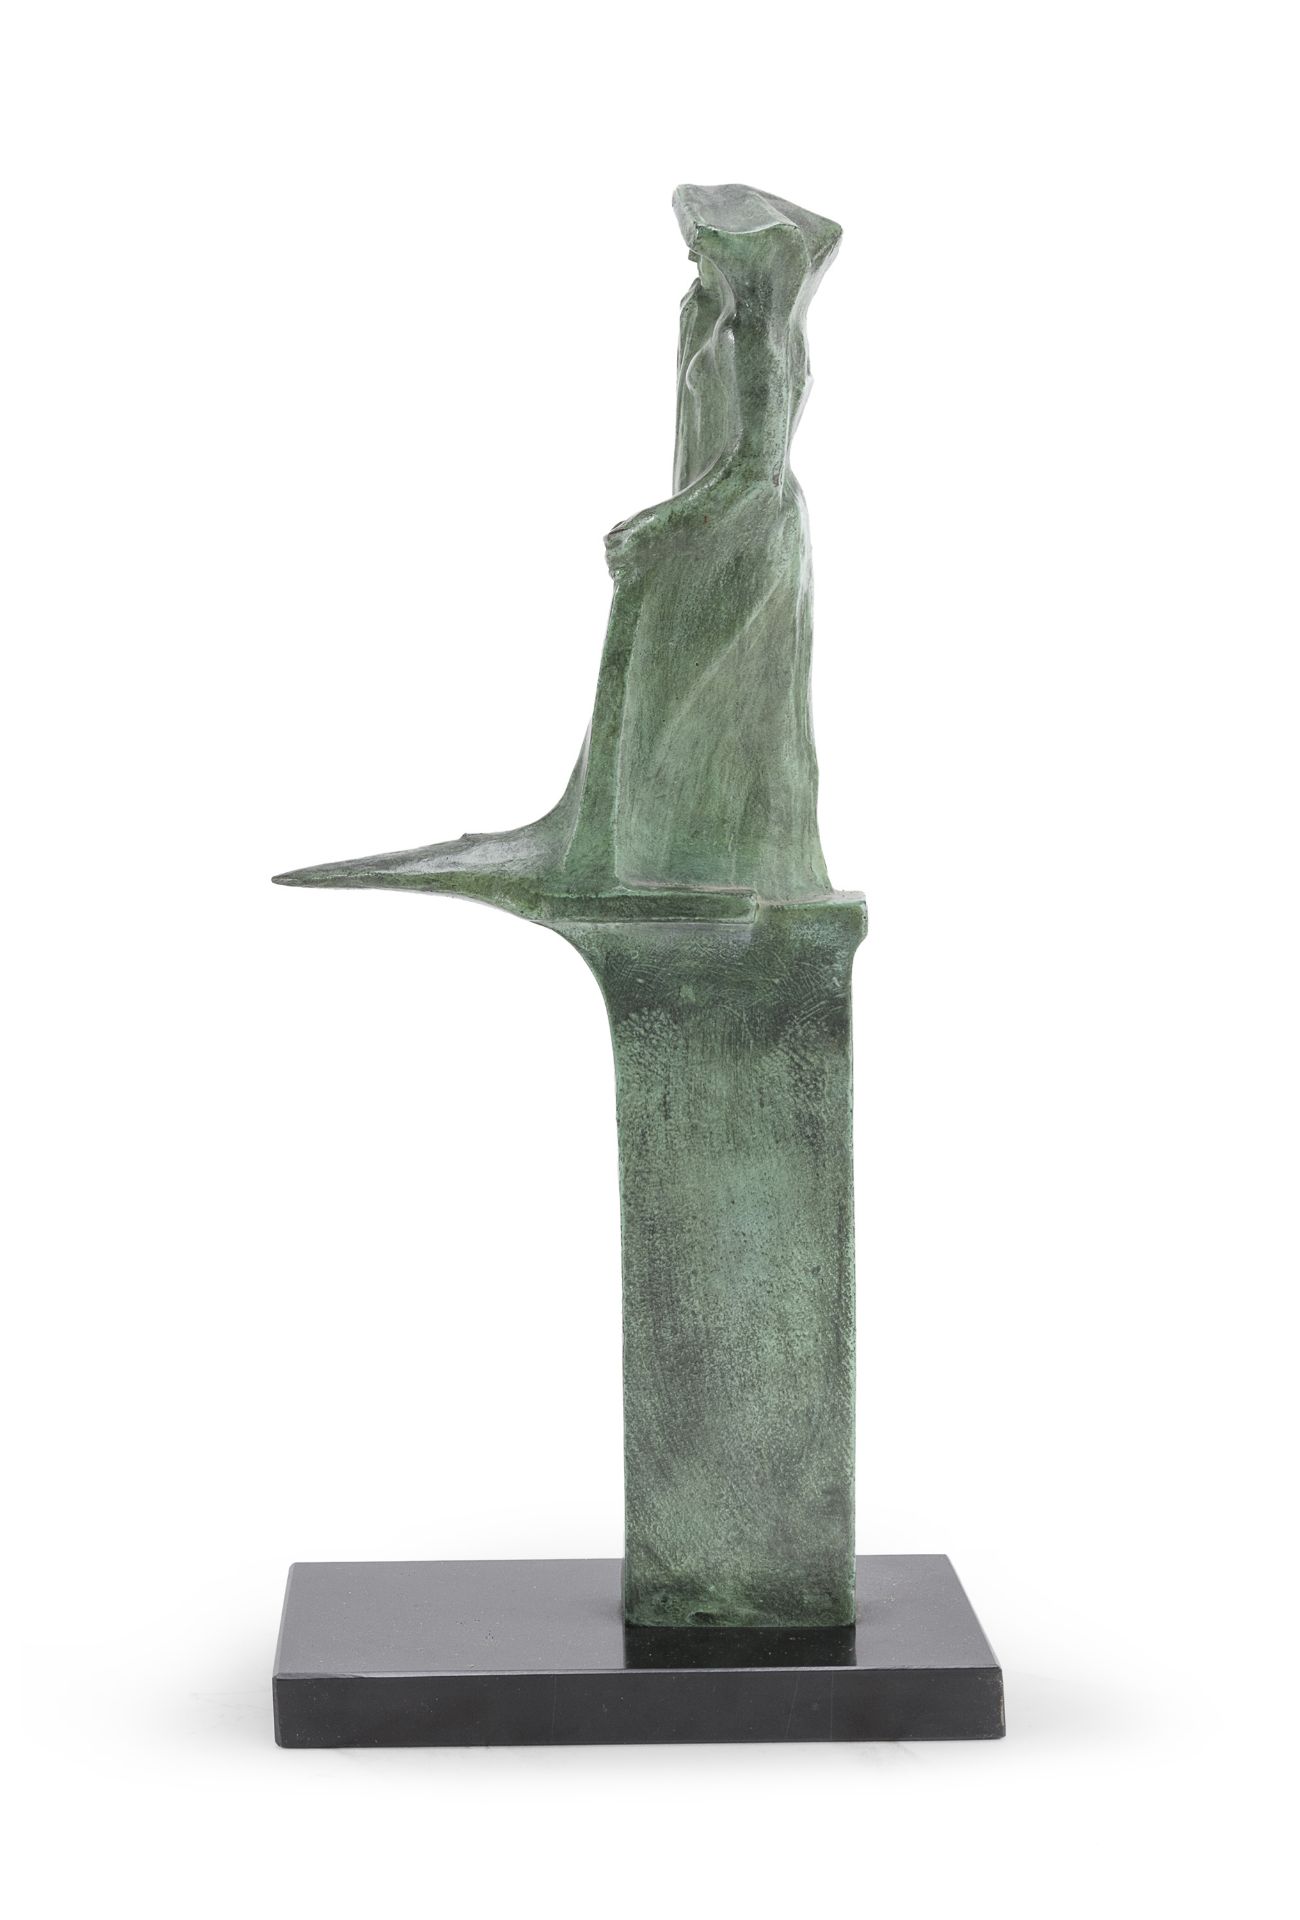 BRONZE SCULPTURE OF CYBELE BY DUILIO CAMBELLOTTI 1910/1992 - Image 2 of 3